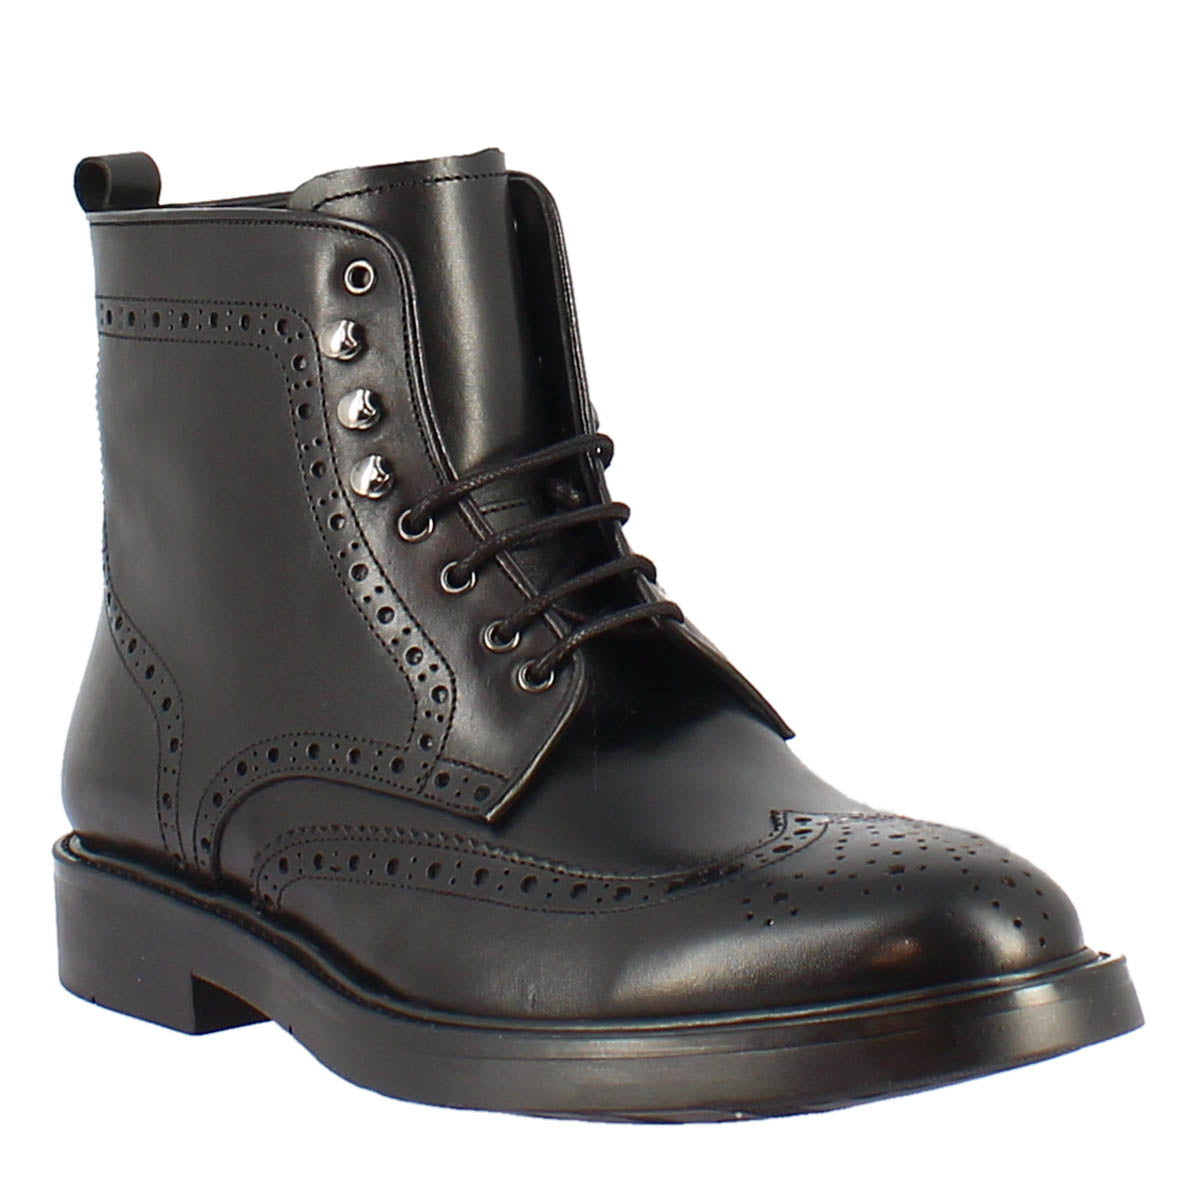 Men's brogue derby ankle boot in black leather with rubber sole 